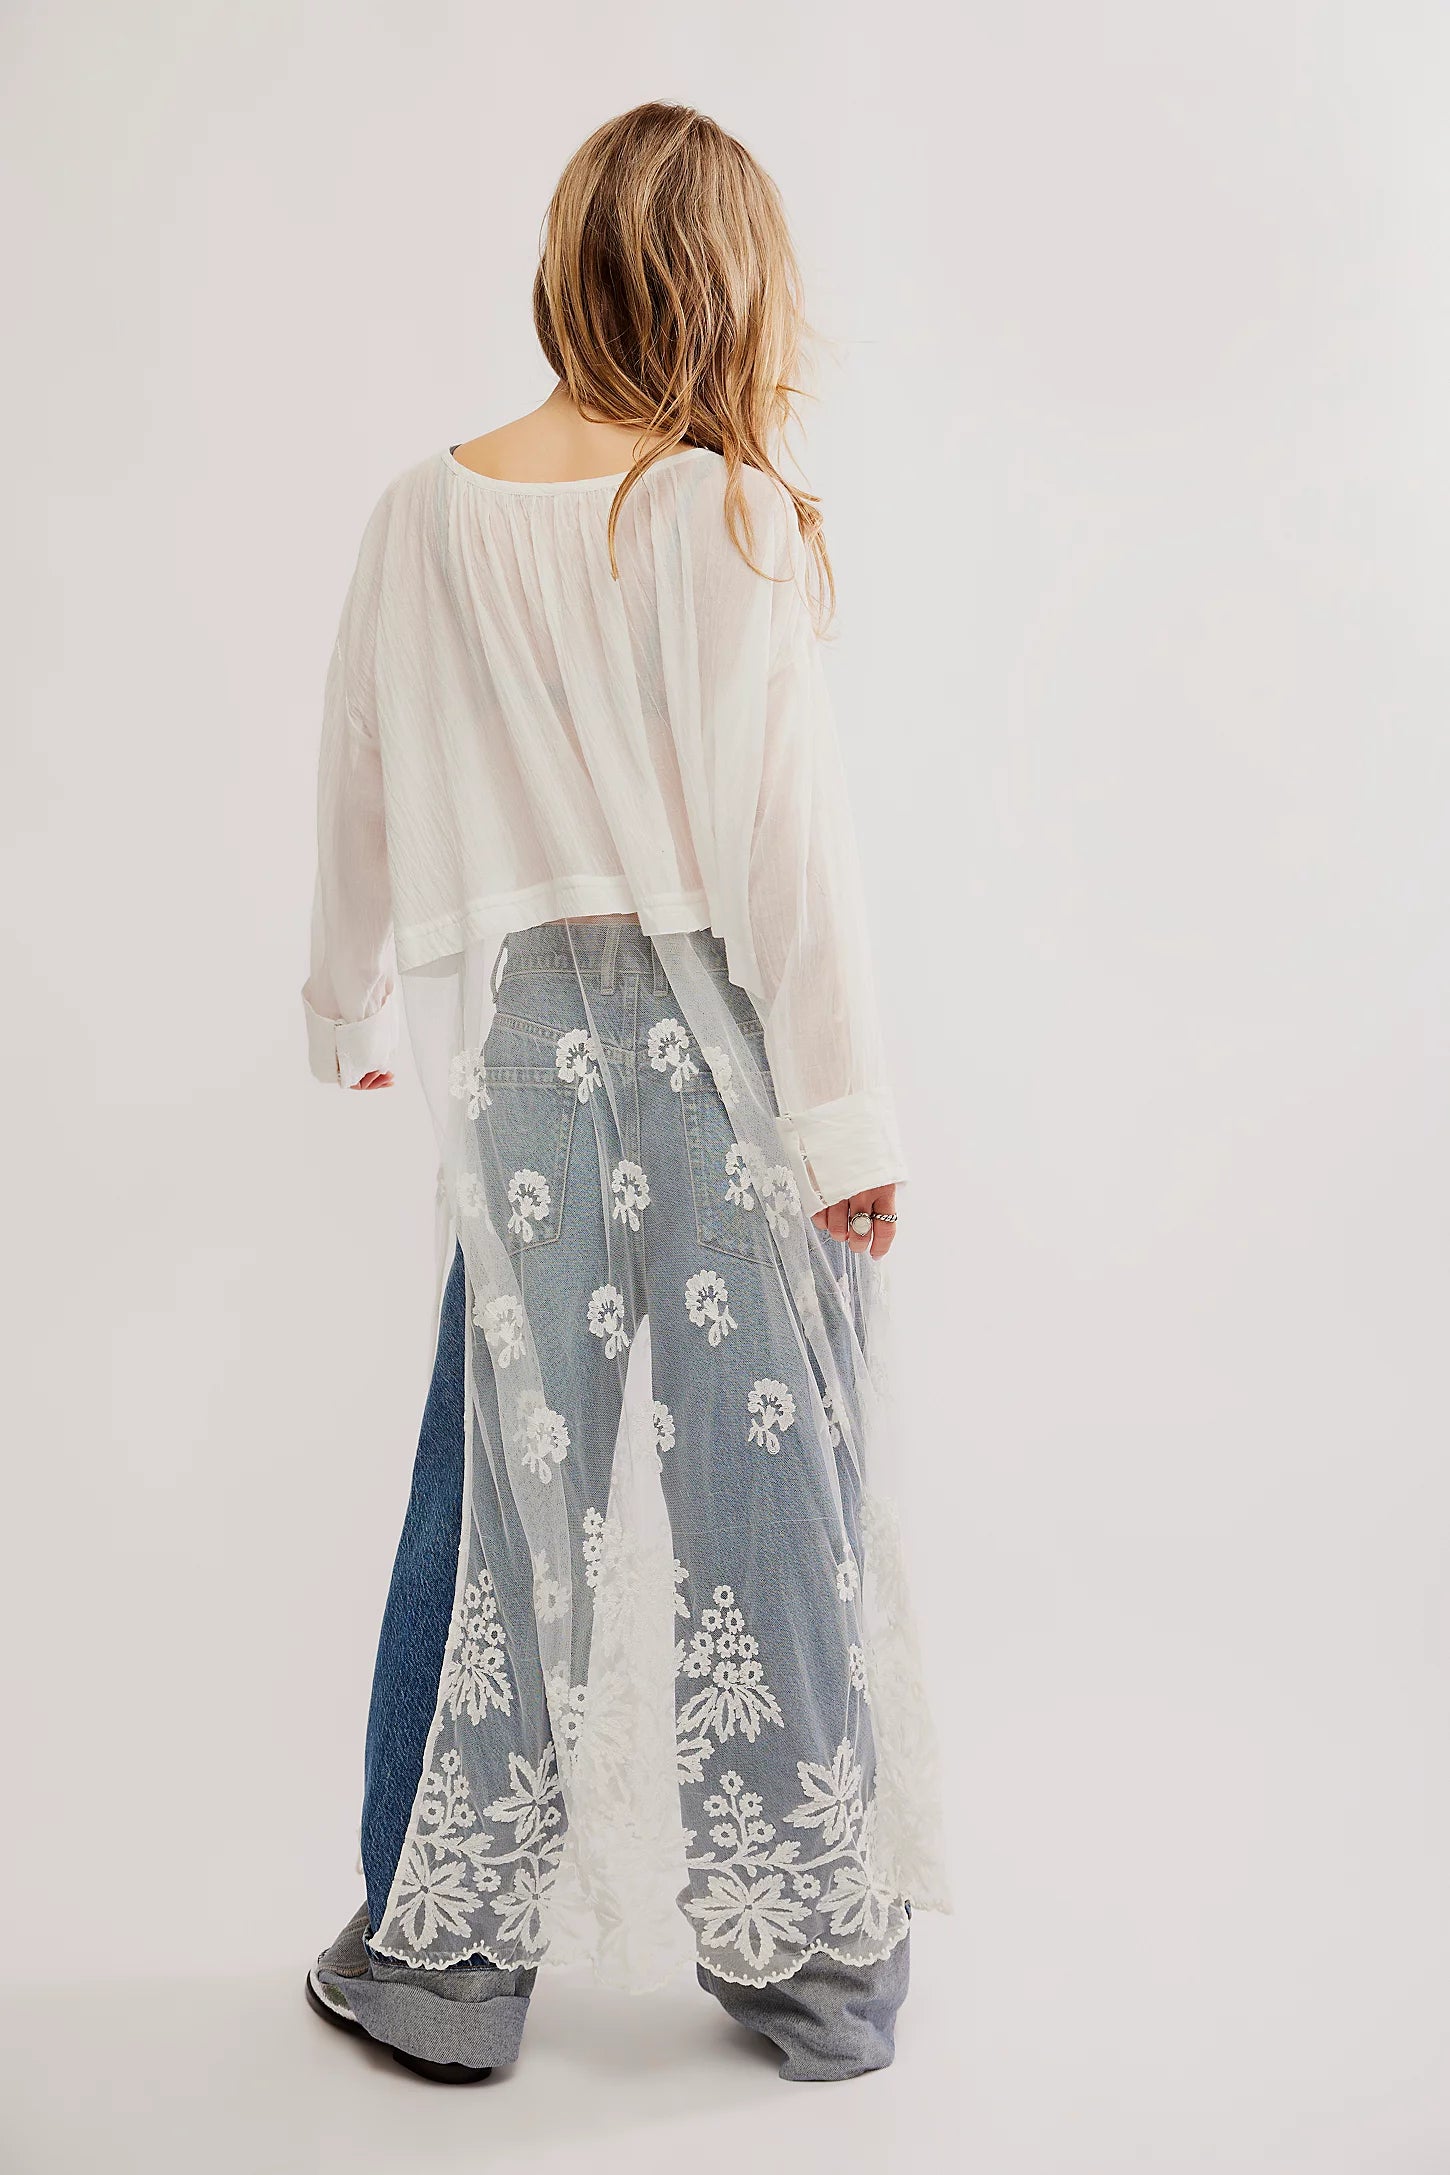 Free People Willow Maxi Top